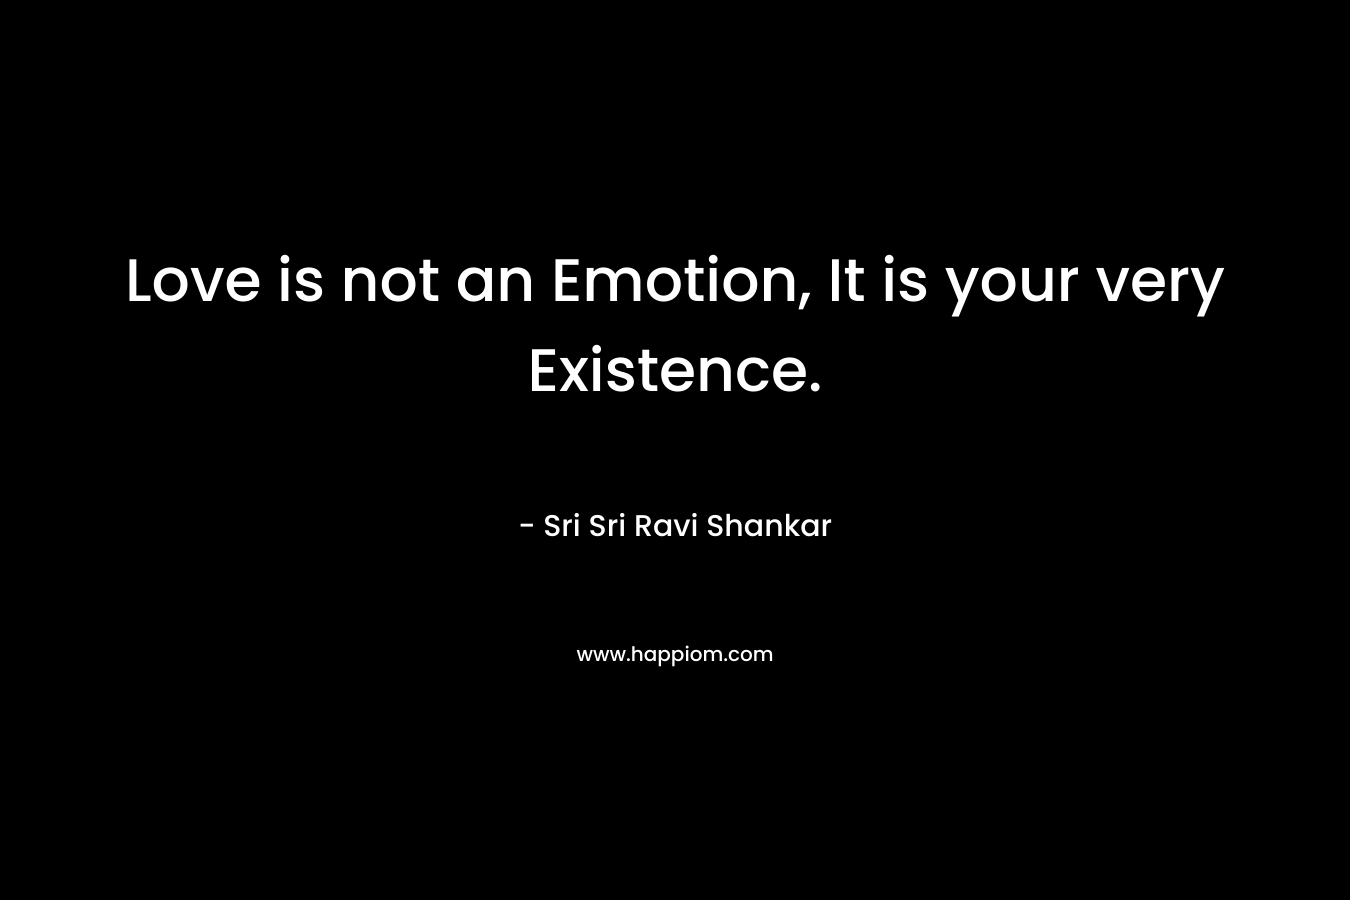 Love is not an Emotion, It is your very Existence.